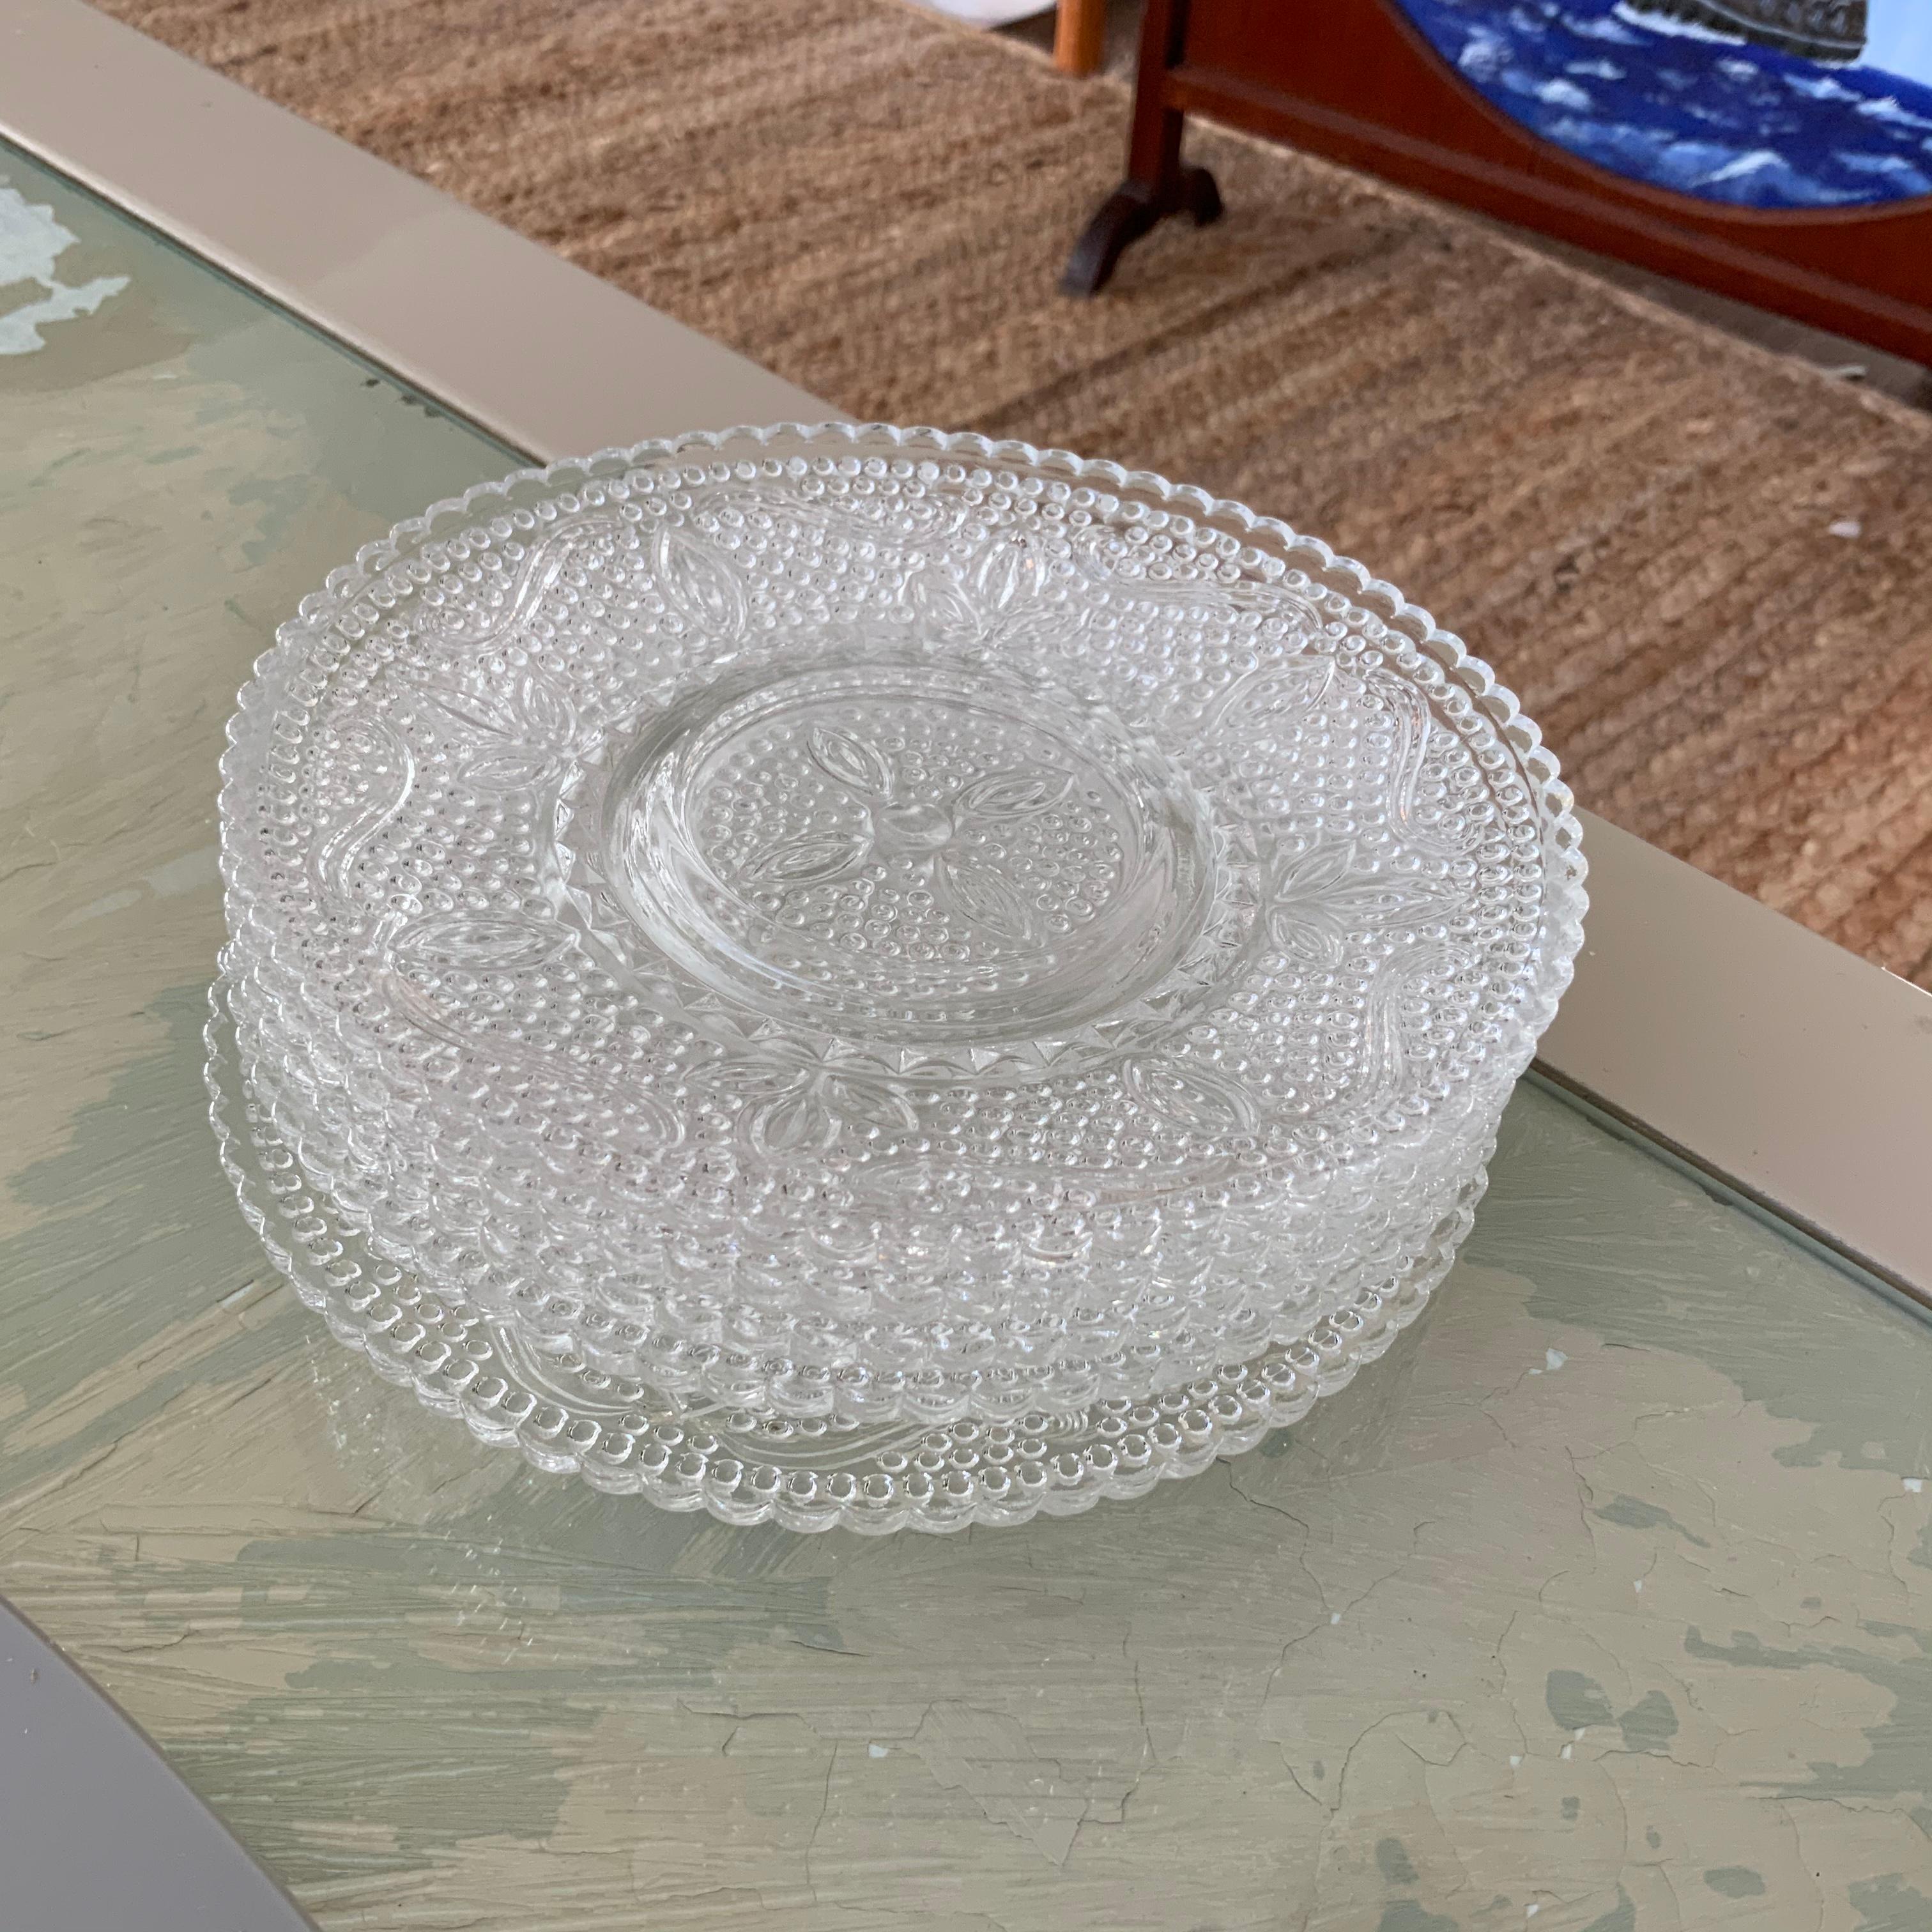 A set of beautiful vintage cut glass salad plates. Layered over a dinner plate, or on it's own, these pieces will be a touch of classic elegance to any dinner table. 

Dimensions:
5.75” diameter
.5” Tall
2.2 lbs.